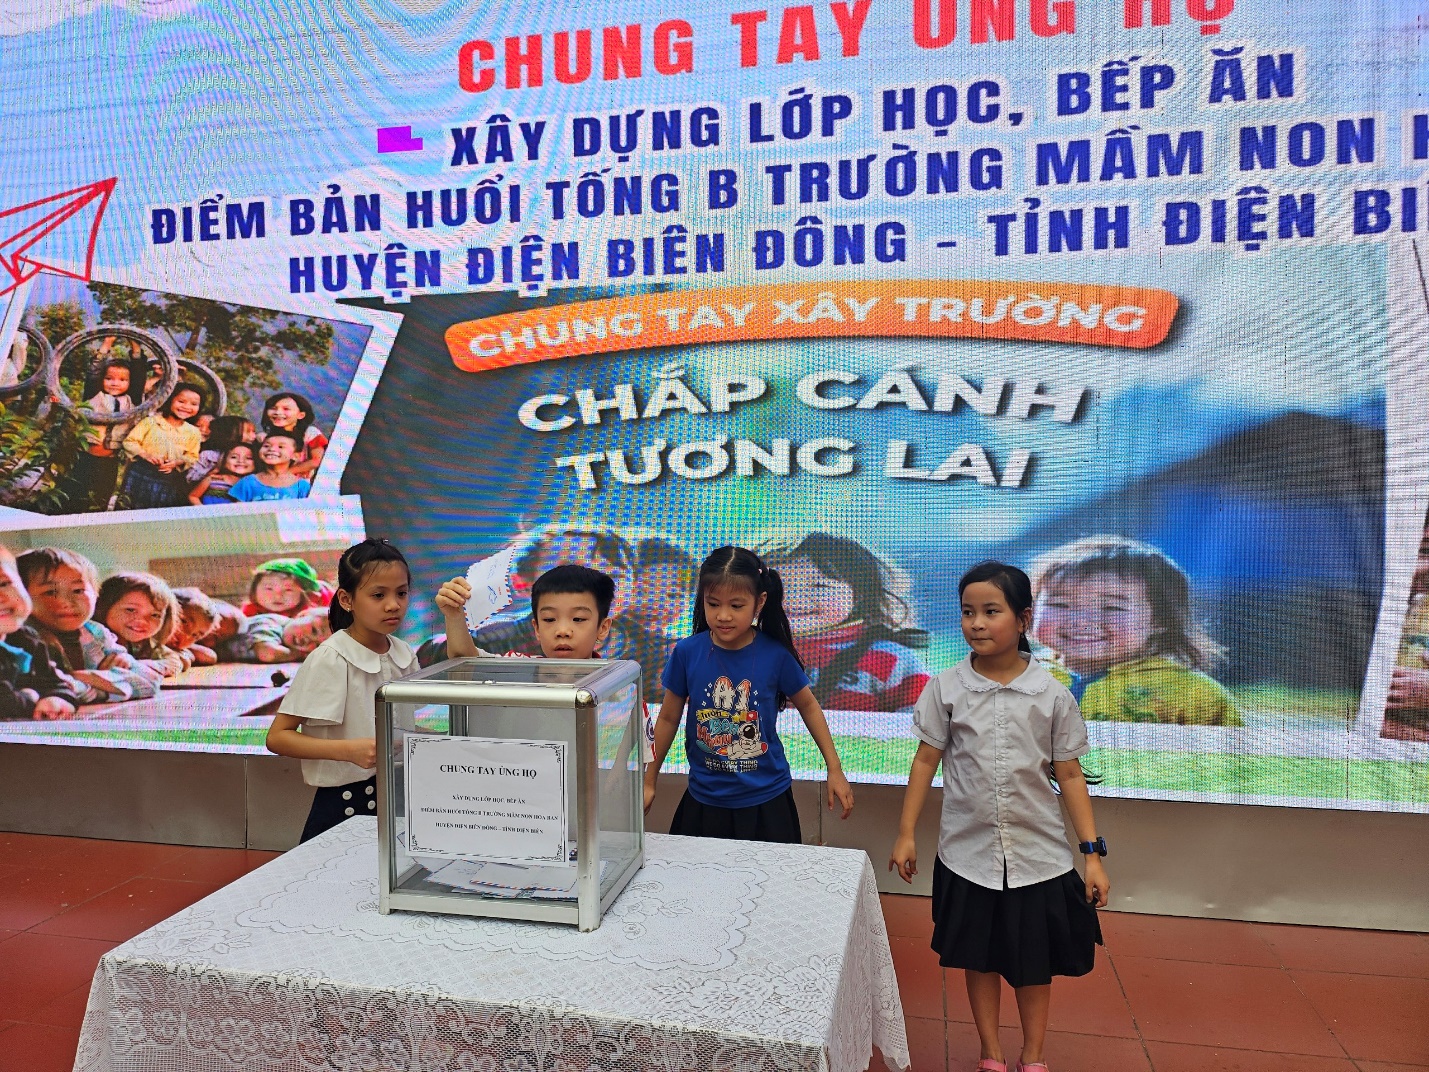 A group of children standing next to a large screen

Description automatically generated